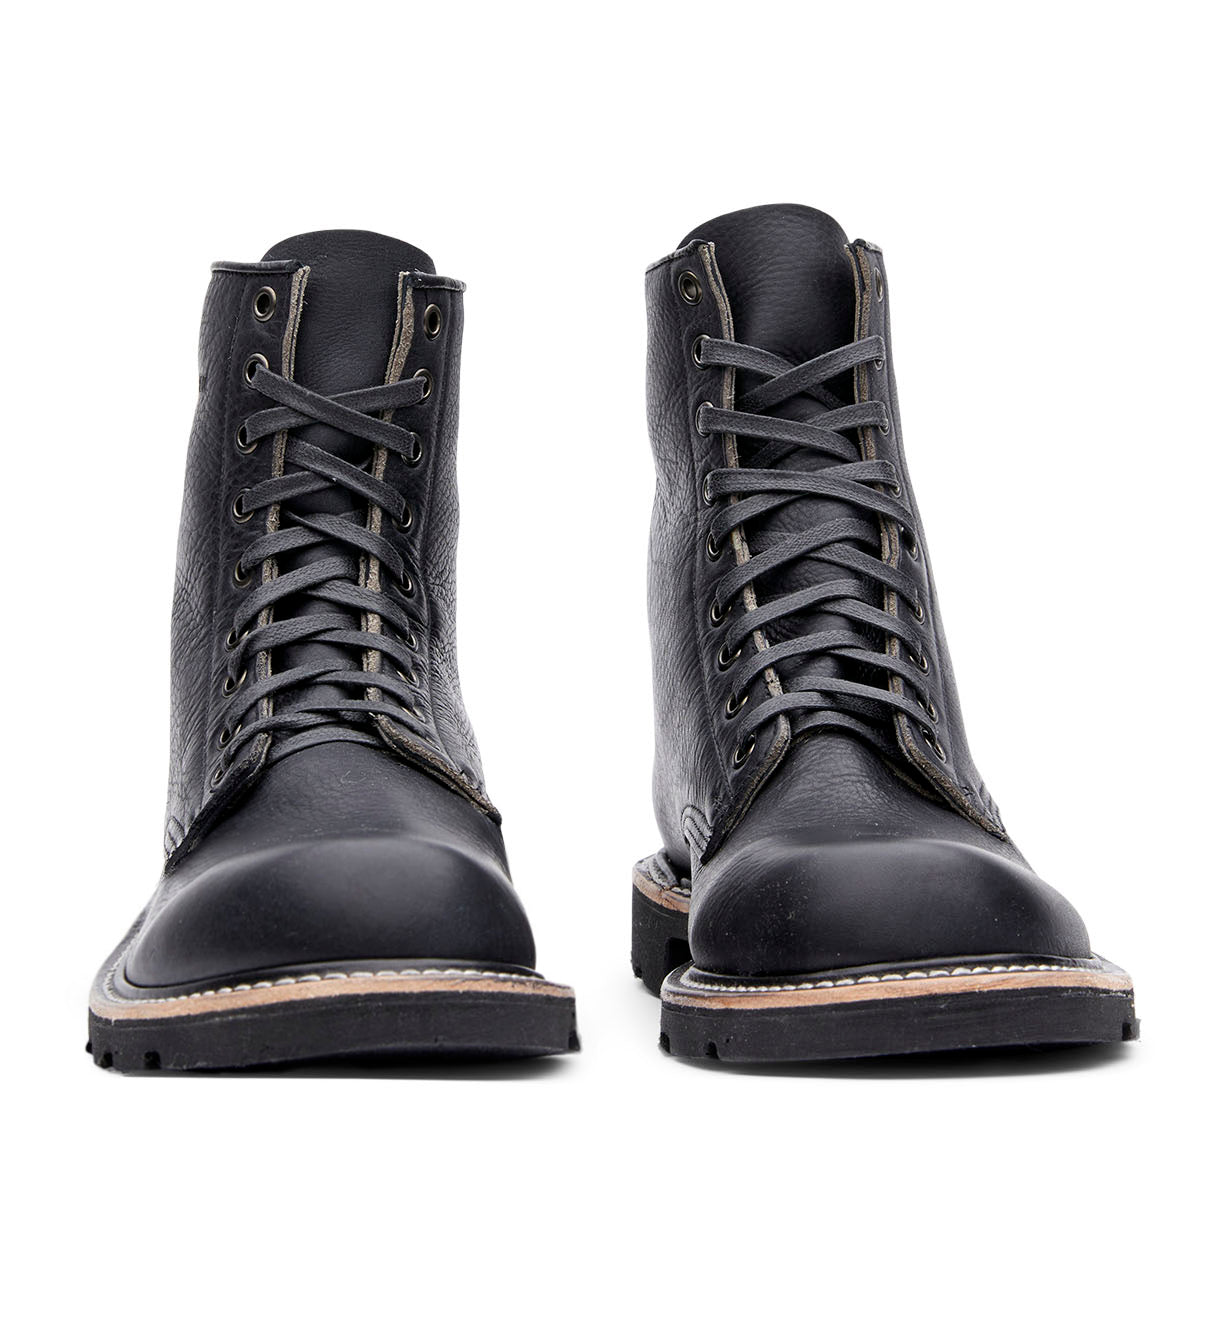 A pair of Jacob black leather boots with laces, made with 360 full grain leather welt by Broken Homme